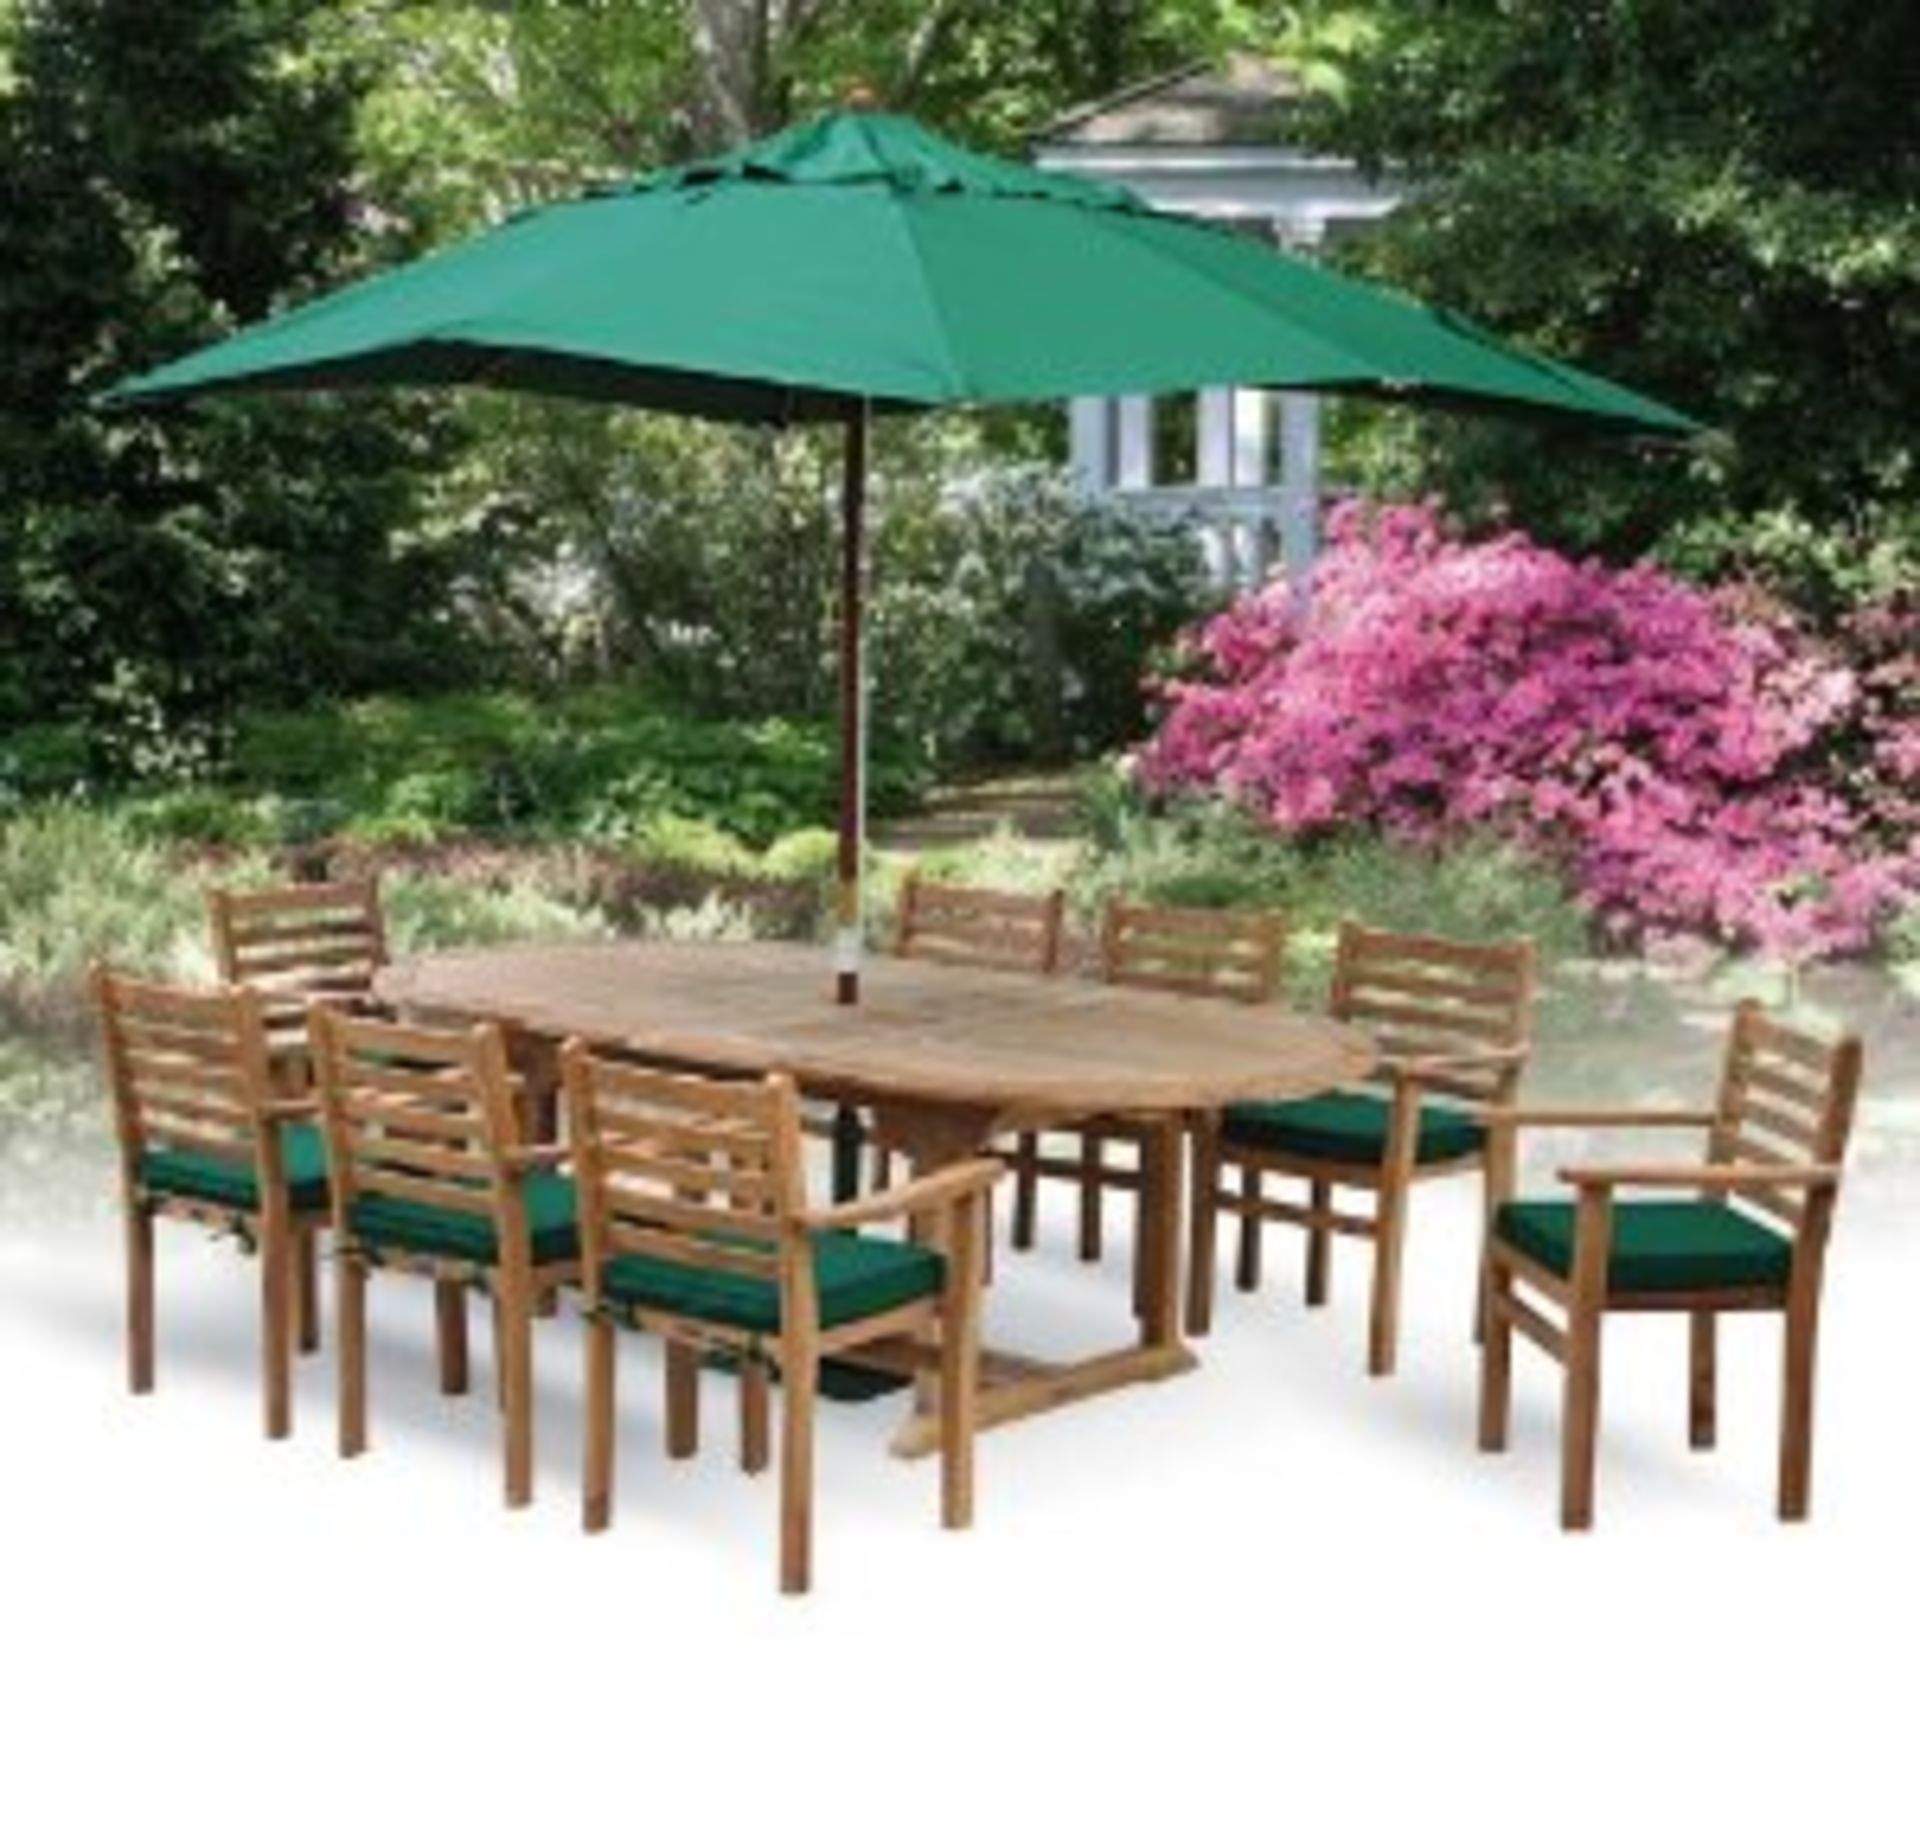 V Brand New Teak Extended Oval Table Set Allows For Up To 8 People including 8 stacking chairs and 8 - Image 2 of 2